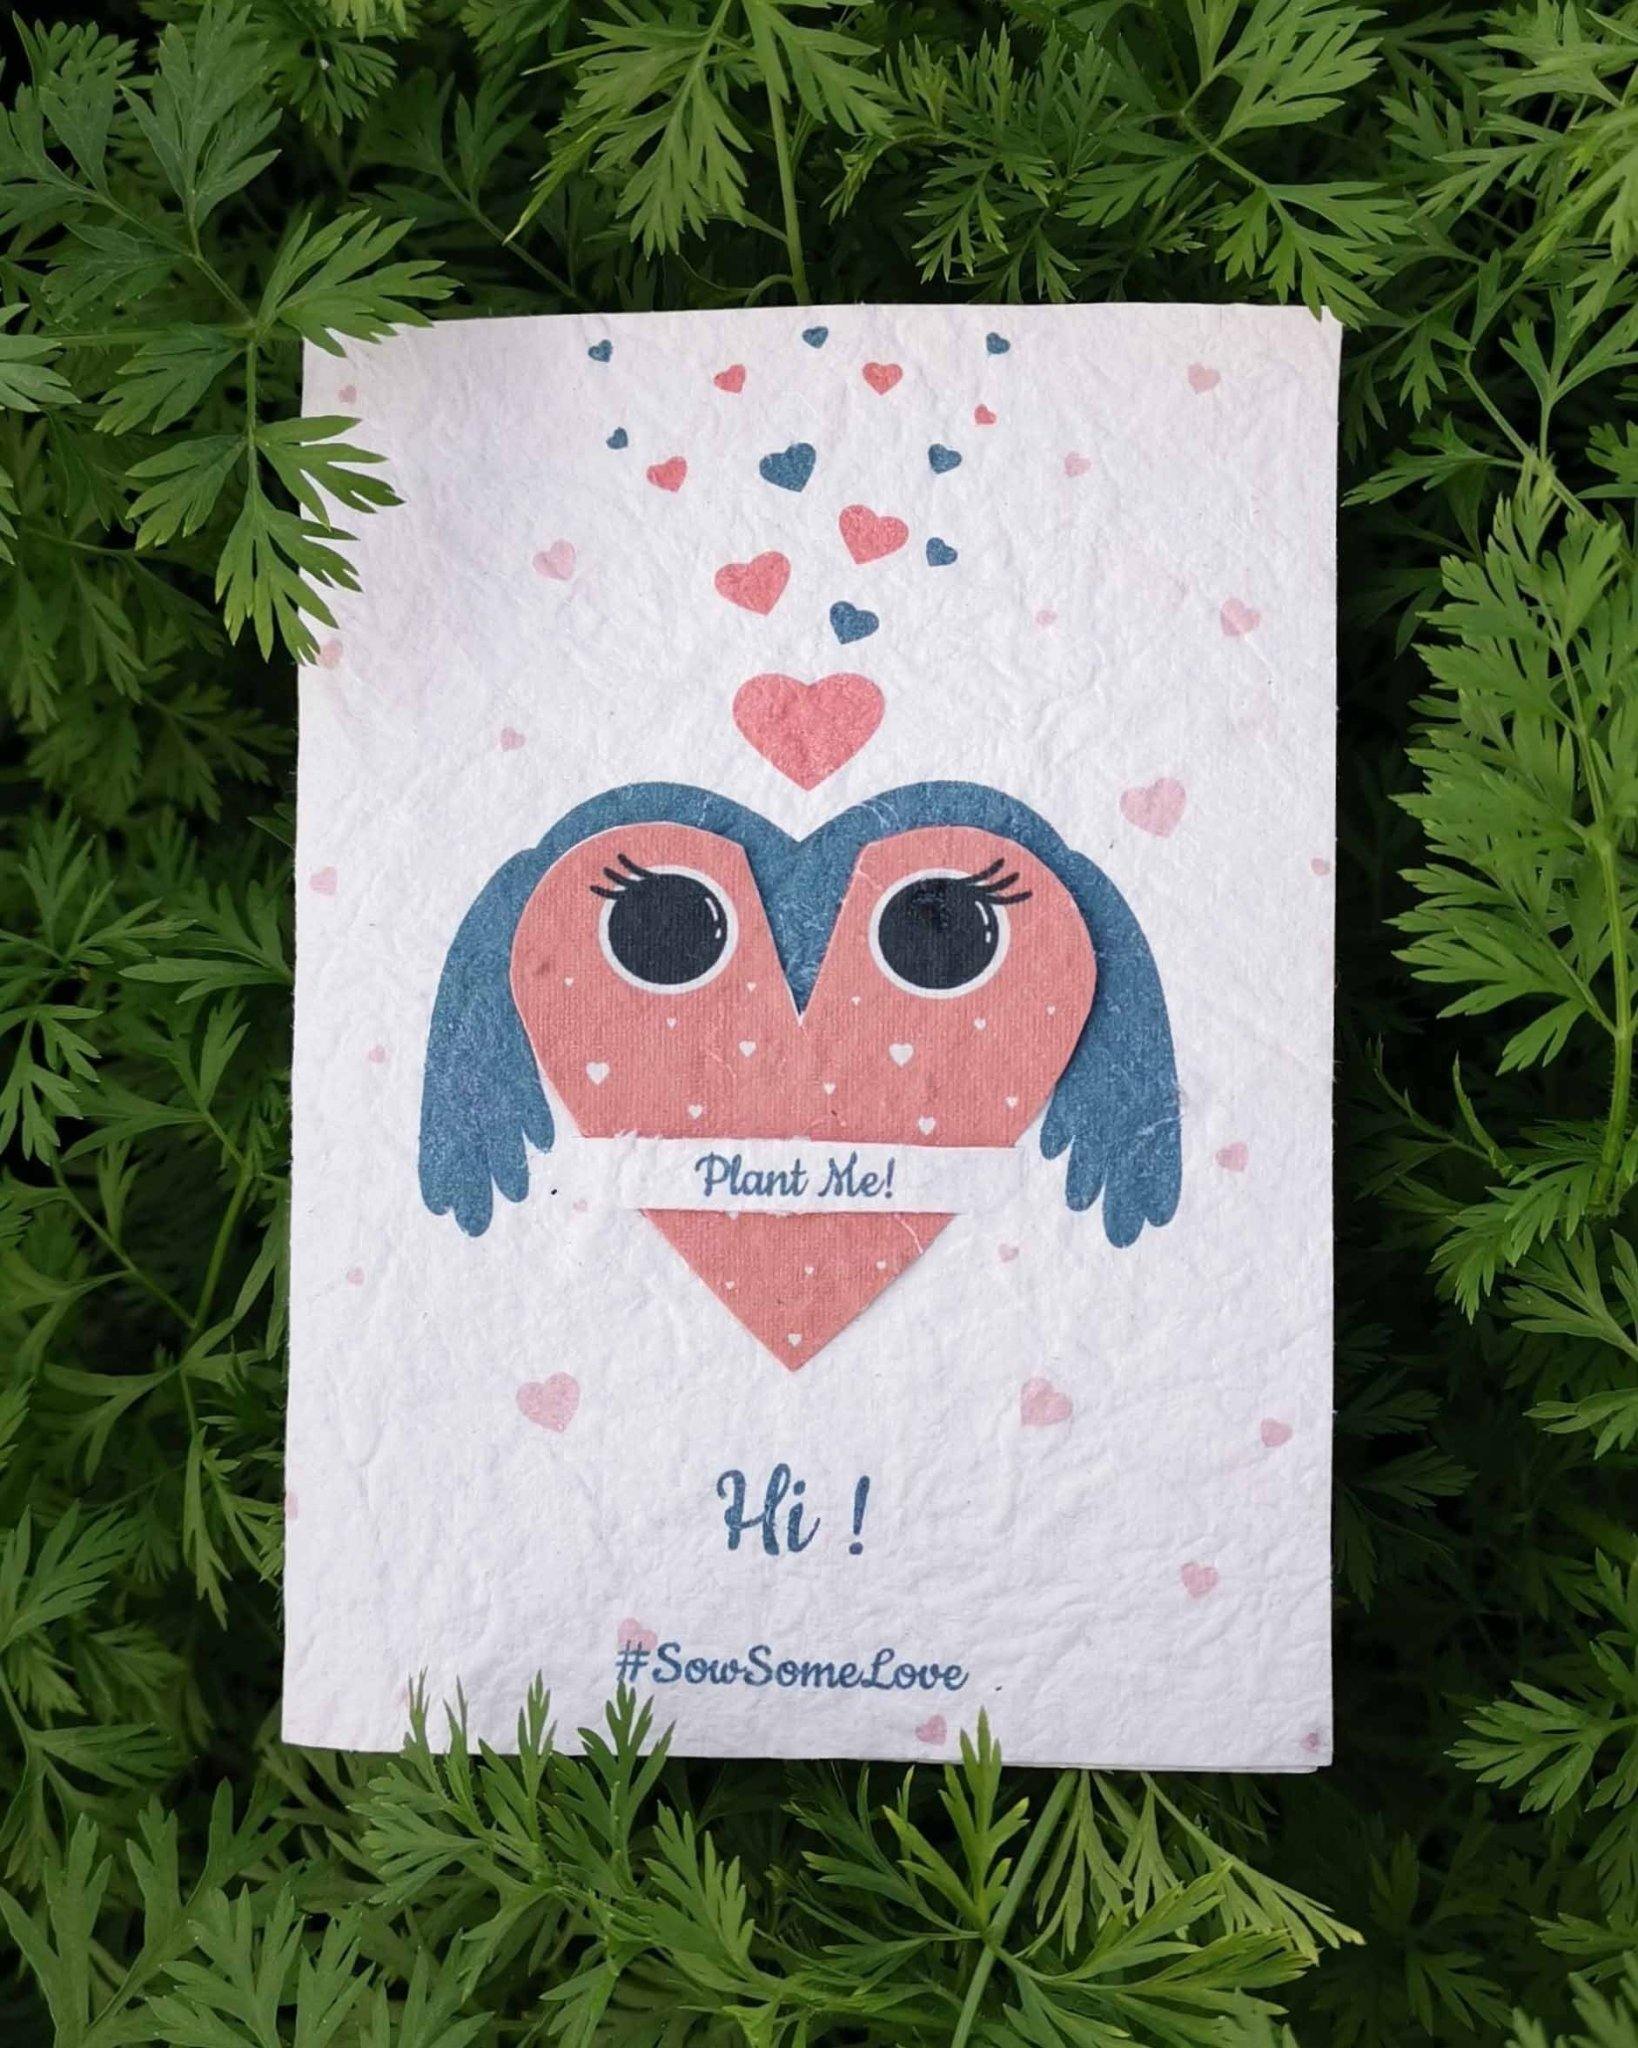  Plantable valentines day greeting card with seeds embedded in it